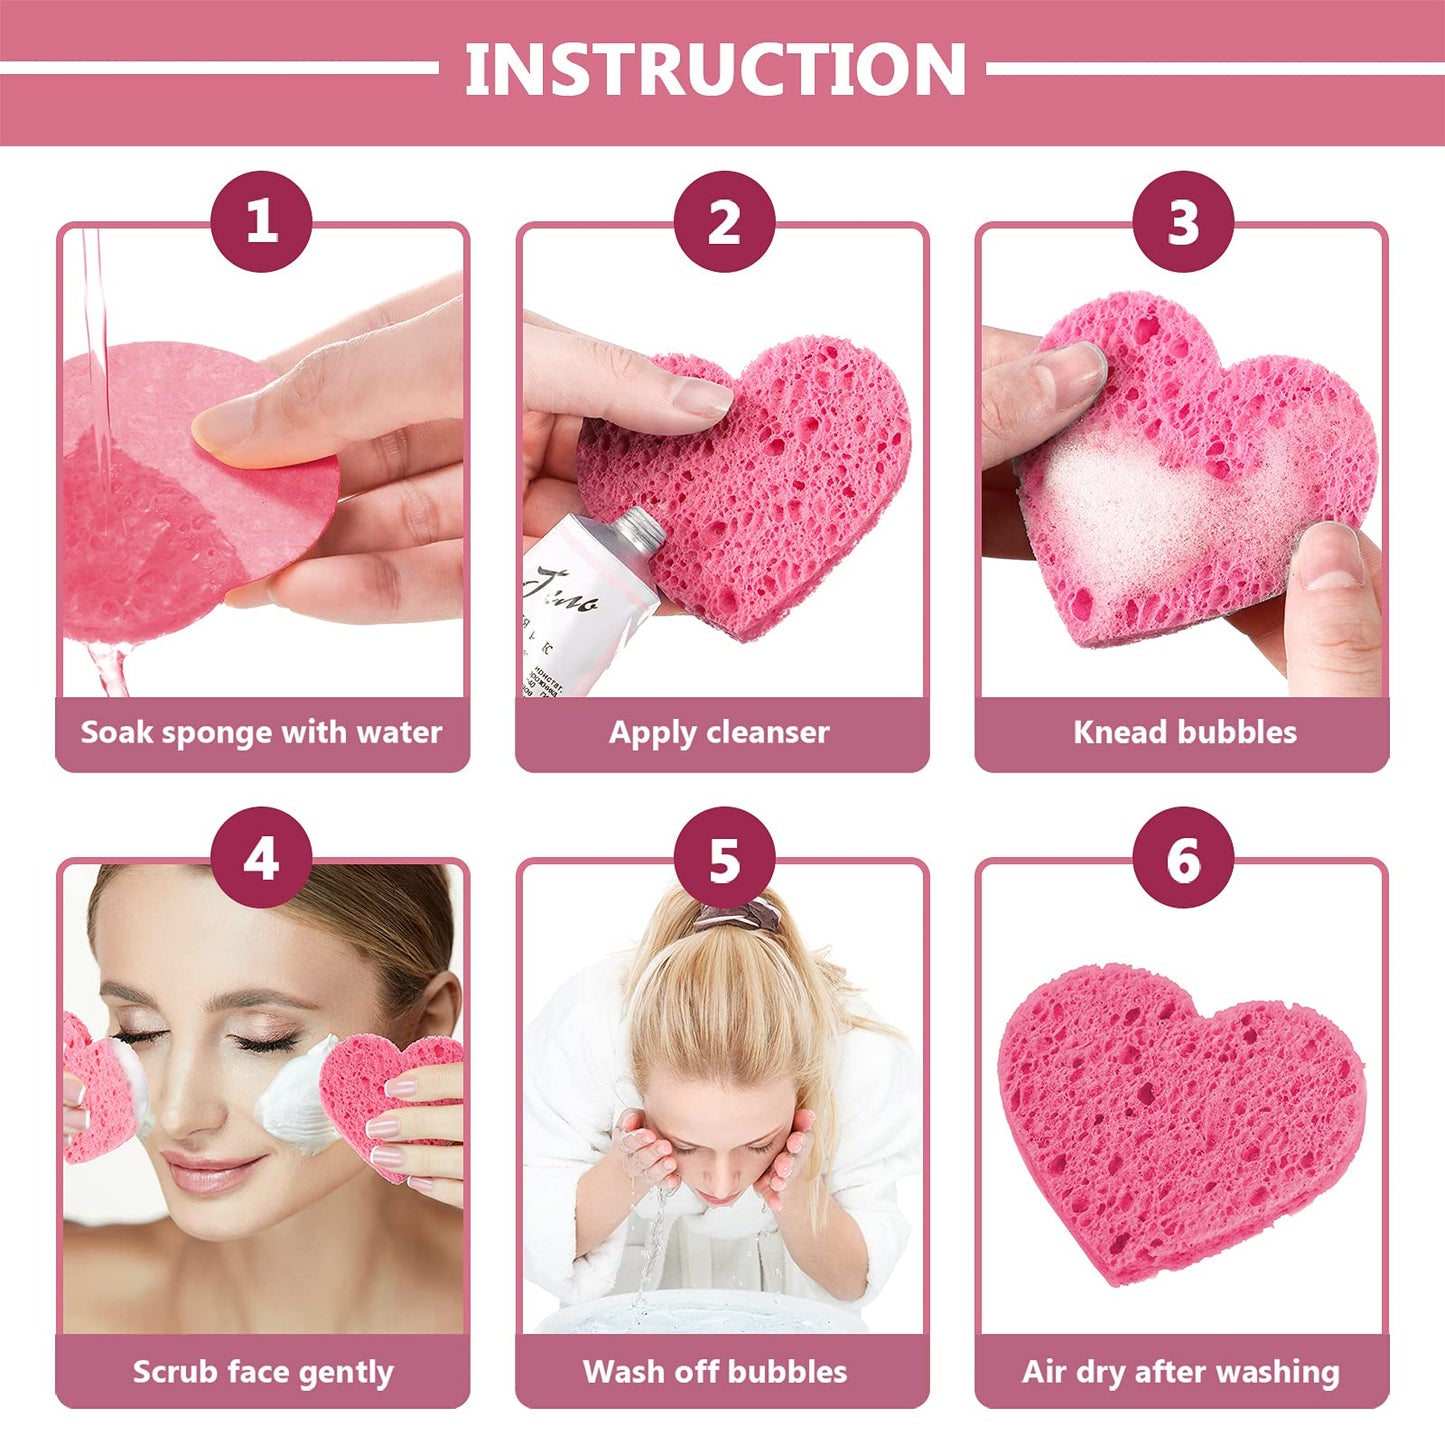 60 Pieces Facial Sponges with Container, Heart Shape Compressed Face Sponge Natural Sponge Pads for Washing Face Cleansing Exfoliating Esthetician Makeup Removal (Pink)